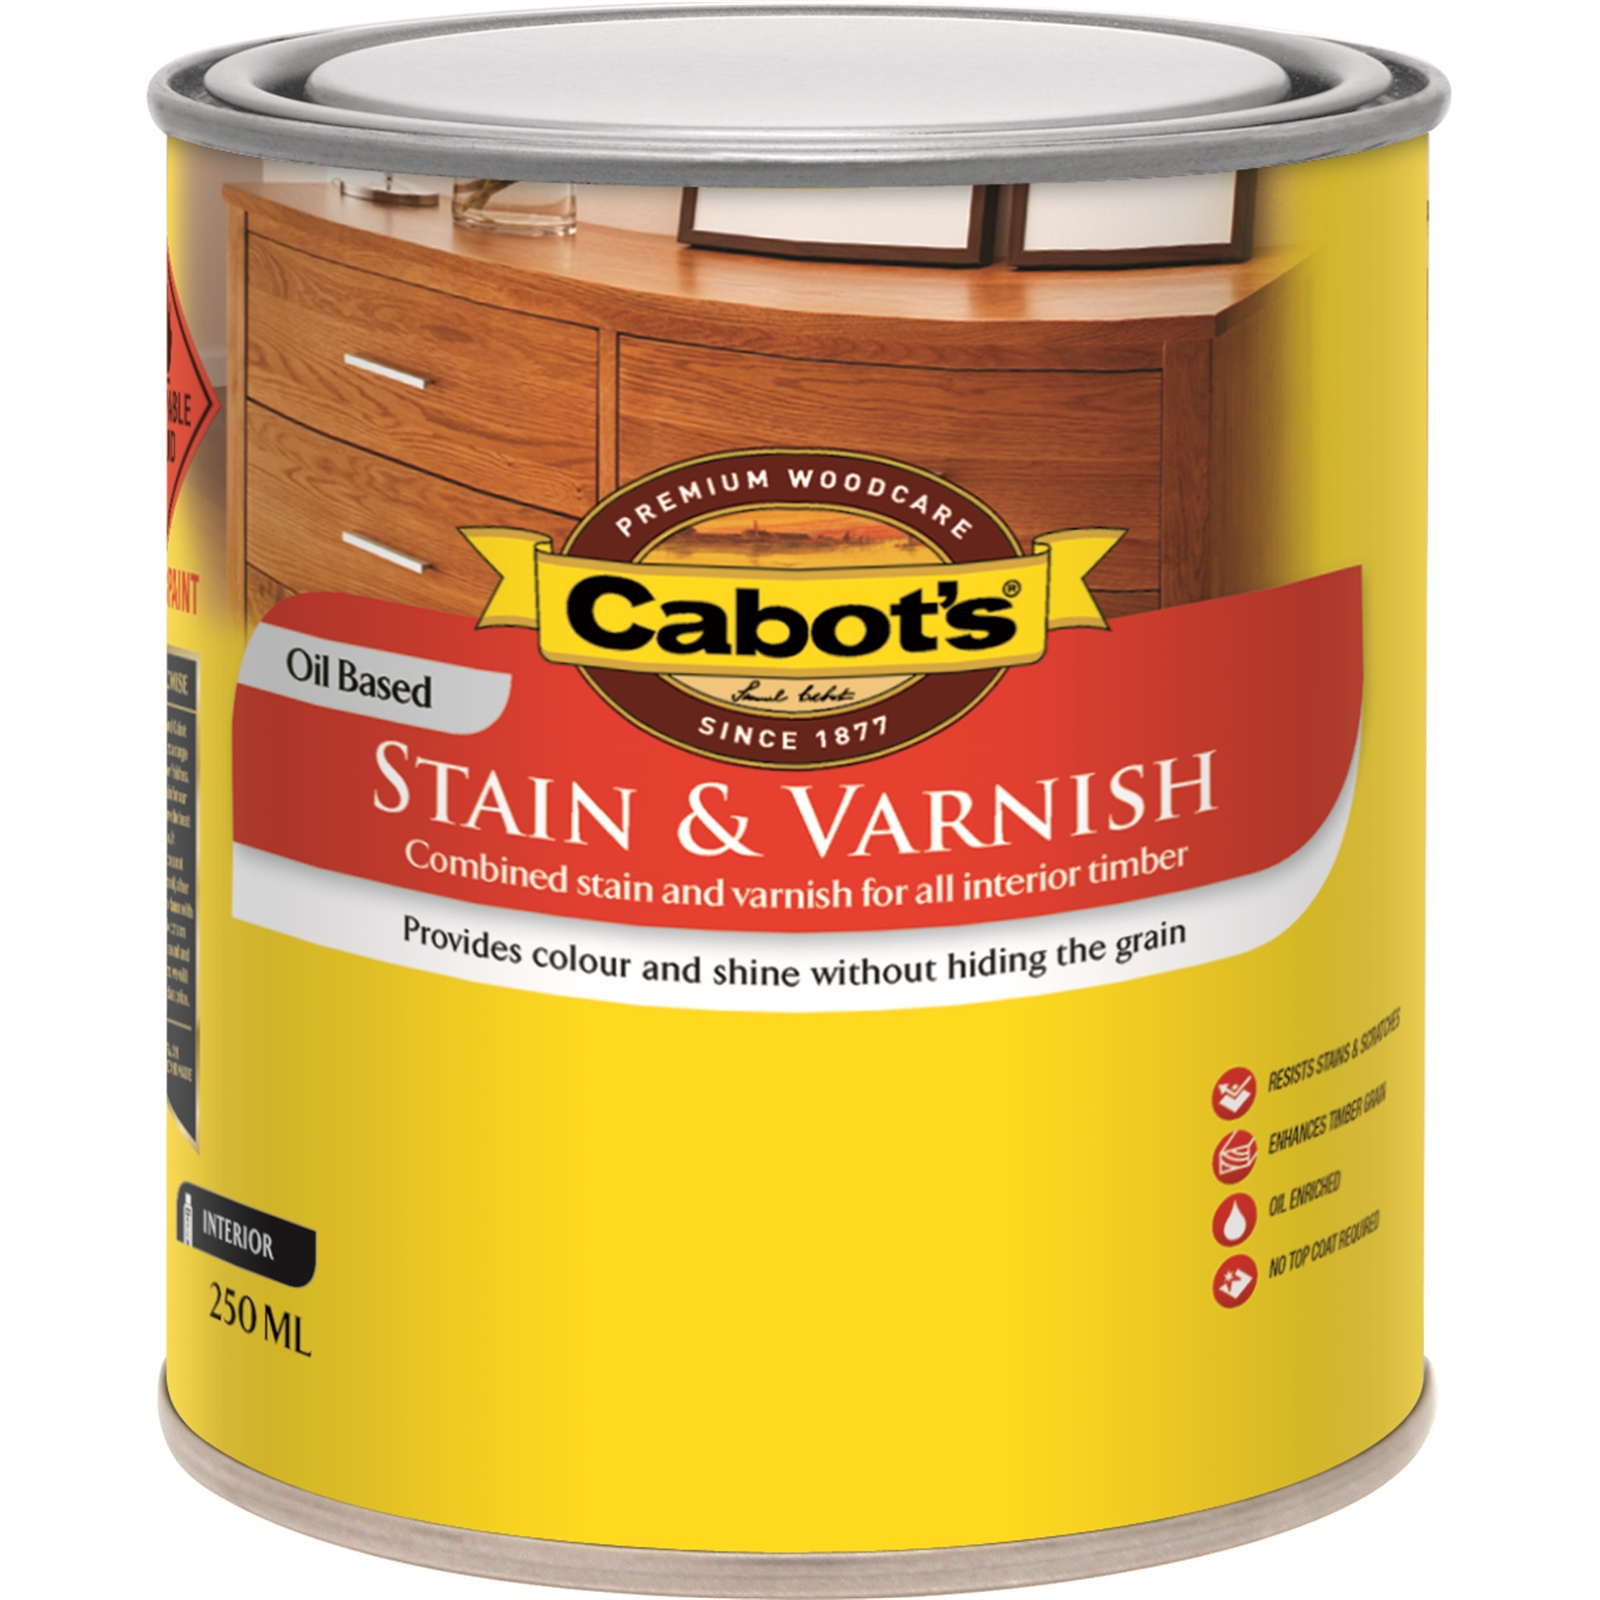 Cabot's 250ml Gloss Oil Based Cedar Stain and Varnish